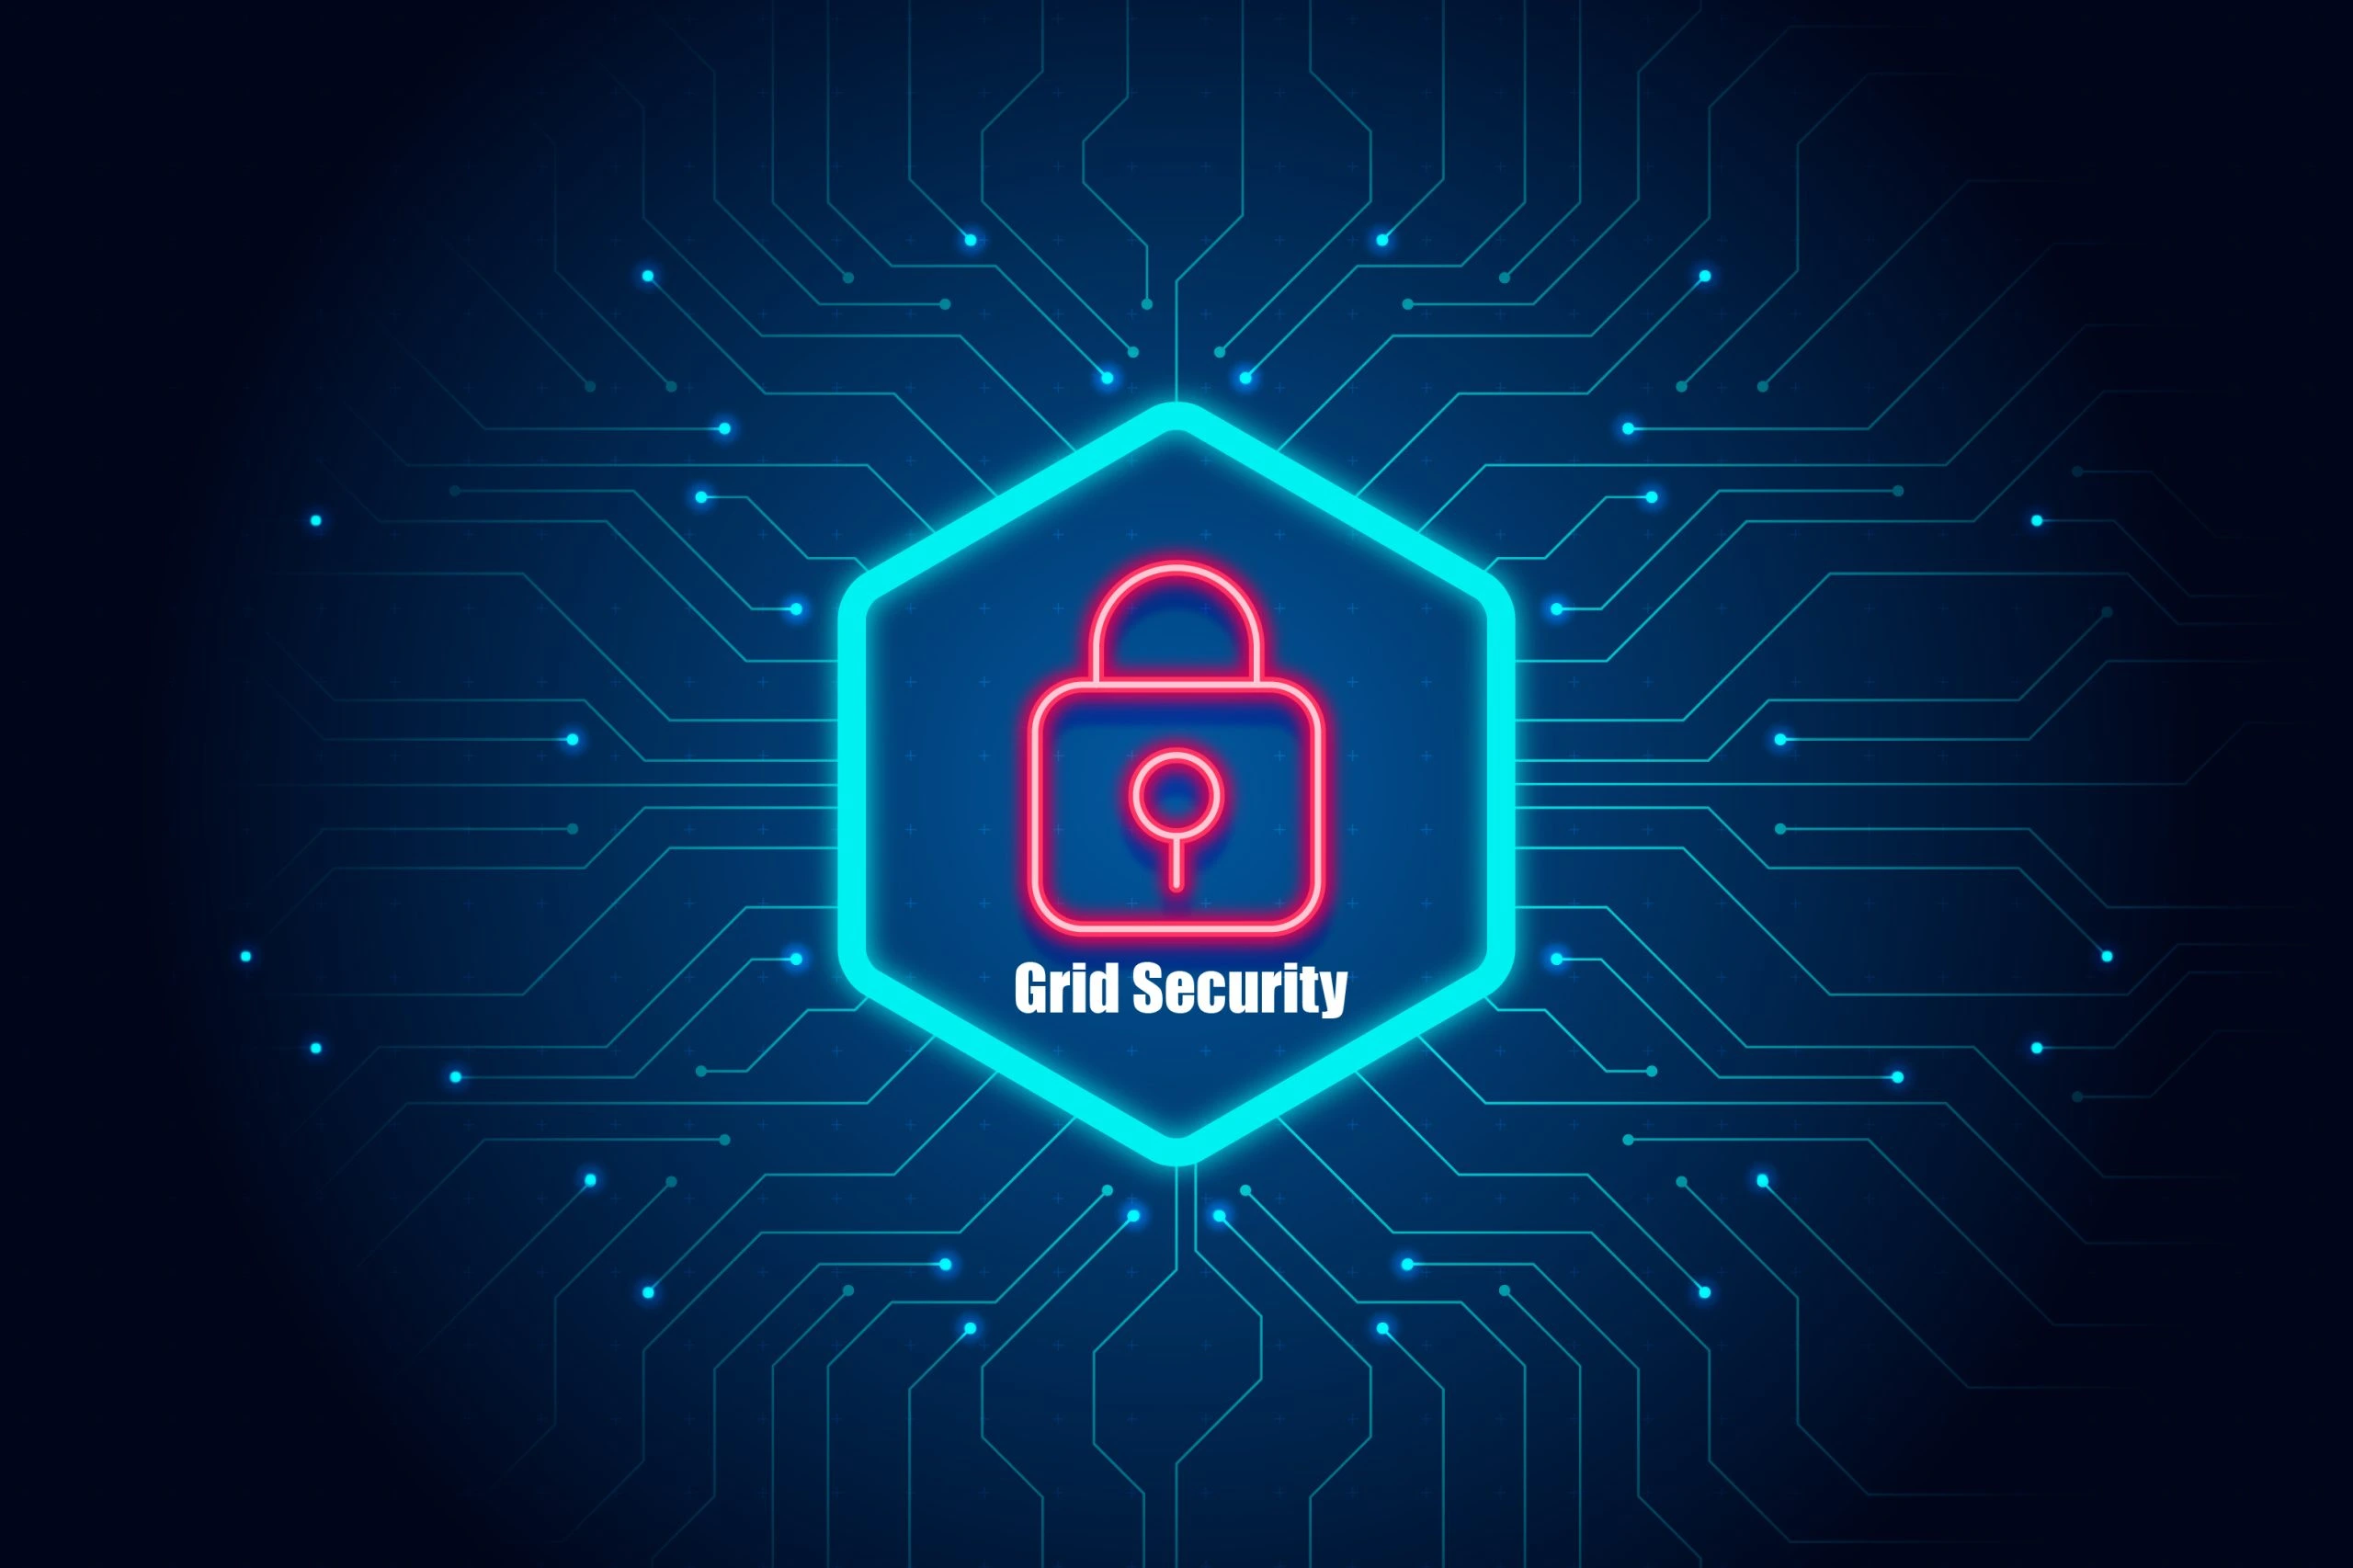 Grid Security illustration showing a power grid with security lock icons.